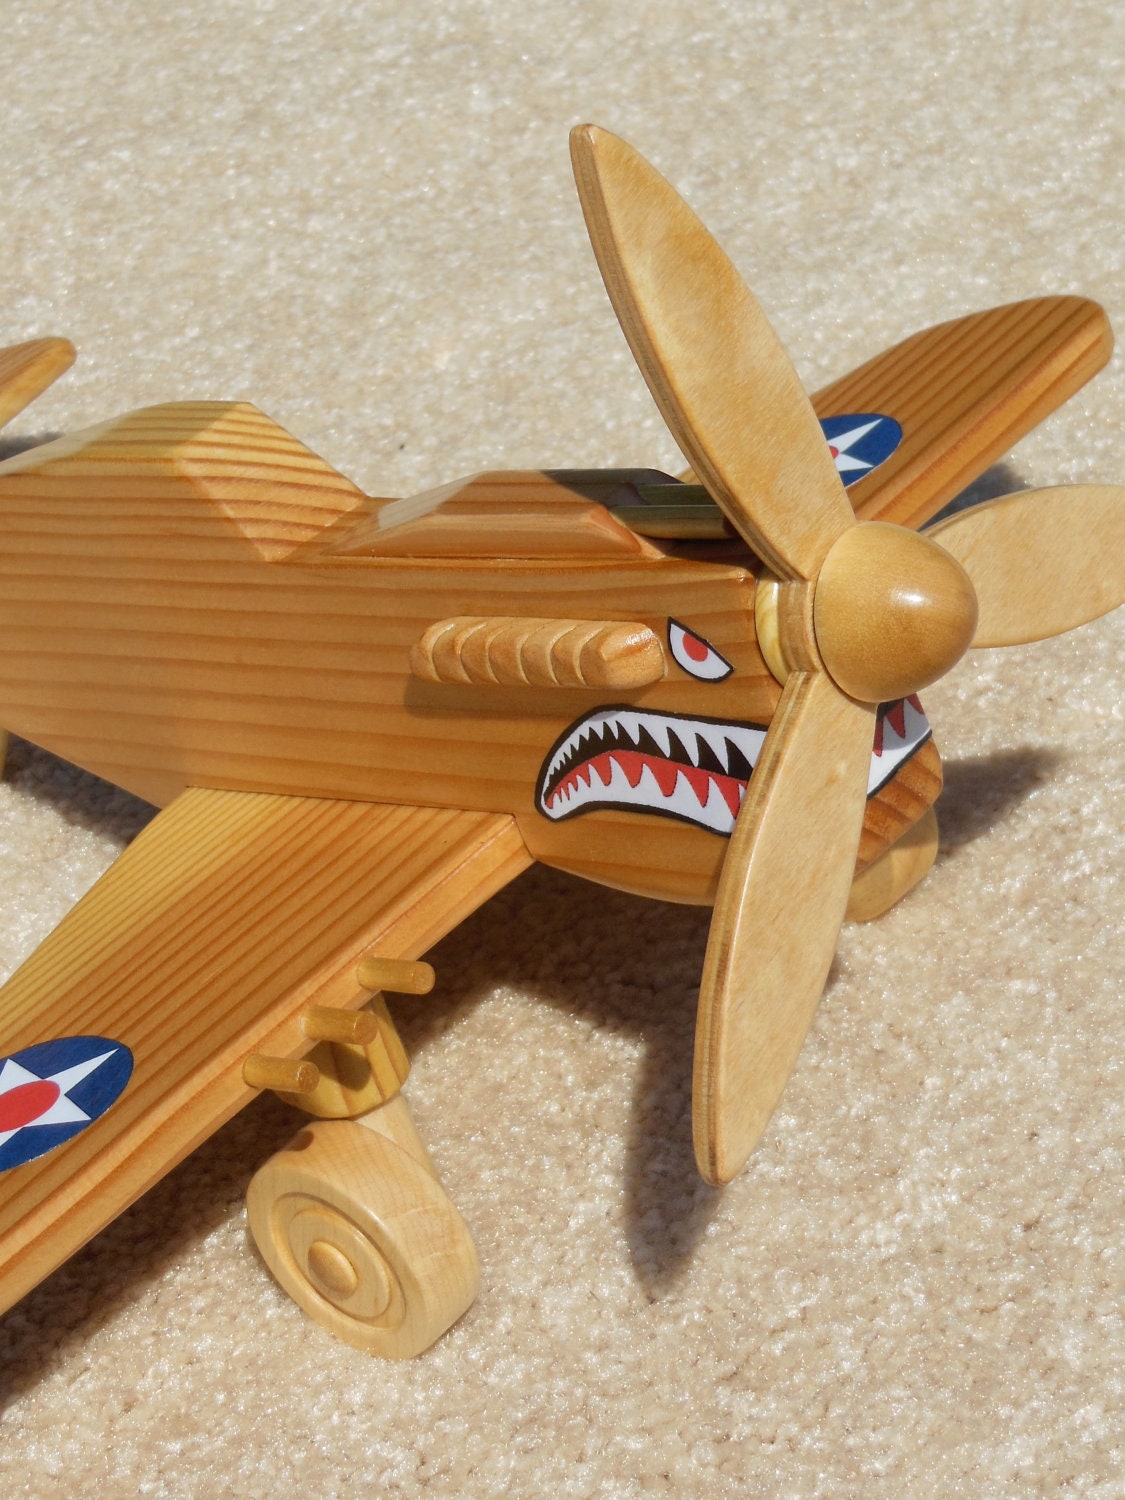 Wooden P-40 Fighter 'Flying Tiger' Toy Plane Etsy